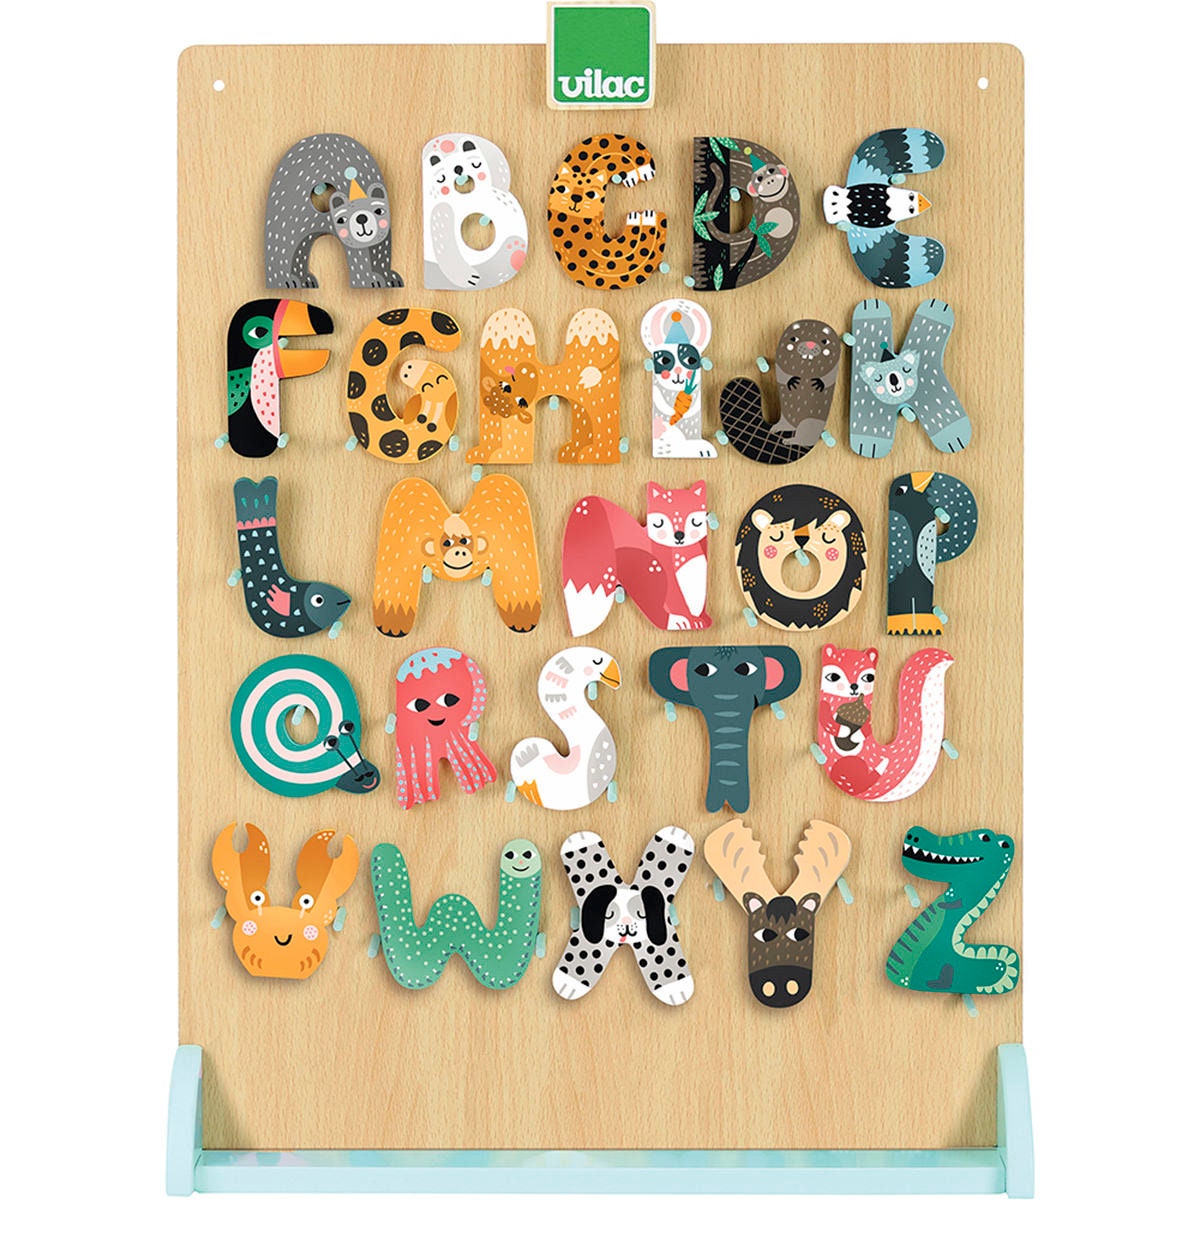 Wooden Alphabet Cutout Letters Set A to Z, PAINTED Wall Nursery Letters,  Wall Hanging, Nursery Playroom Decor, Alphabet Wall, ABC Wall 